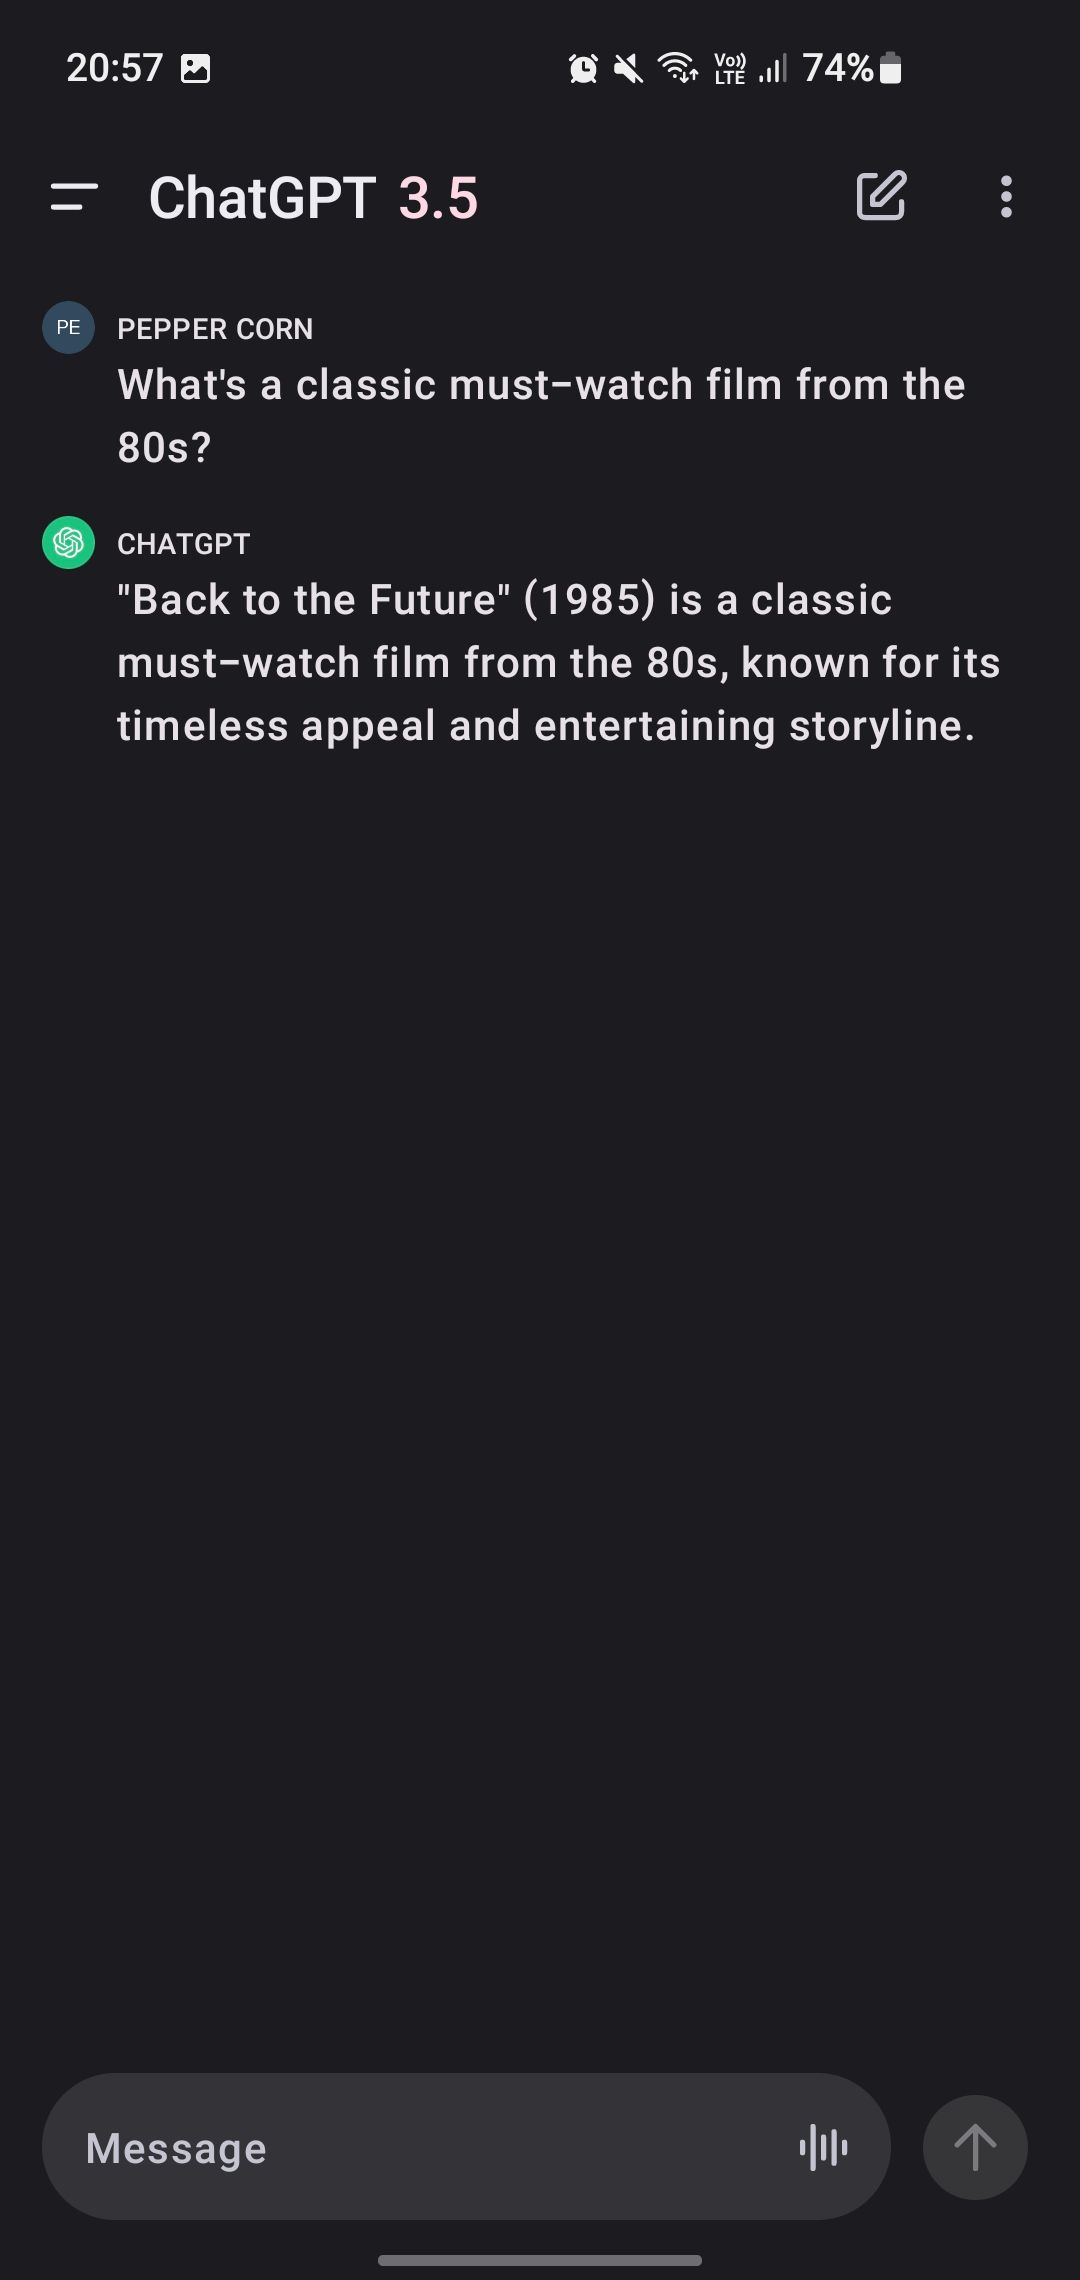 ChatGPT recommending a classic 80s film